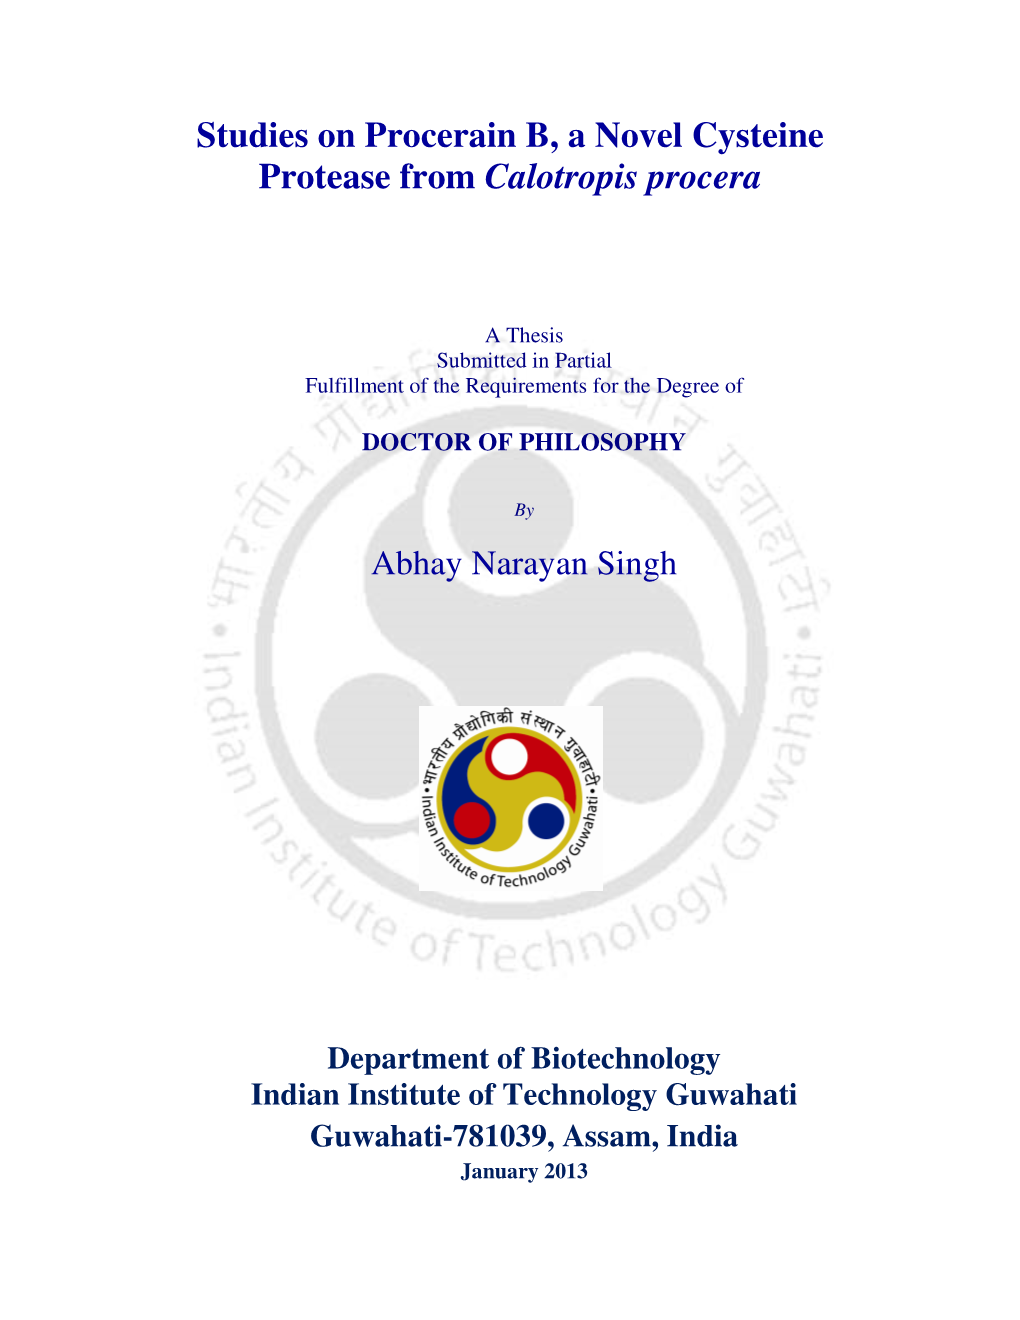 Studies on Procerain B, a Novel Cysteine Protease from Calotropis Procera